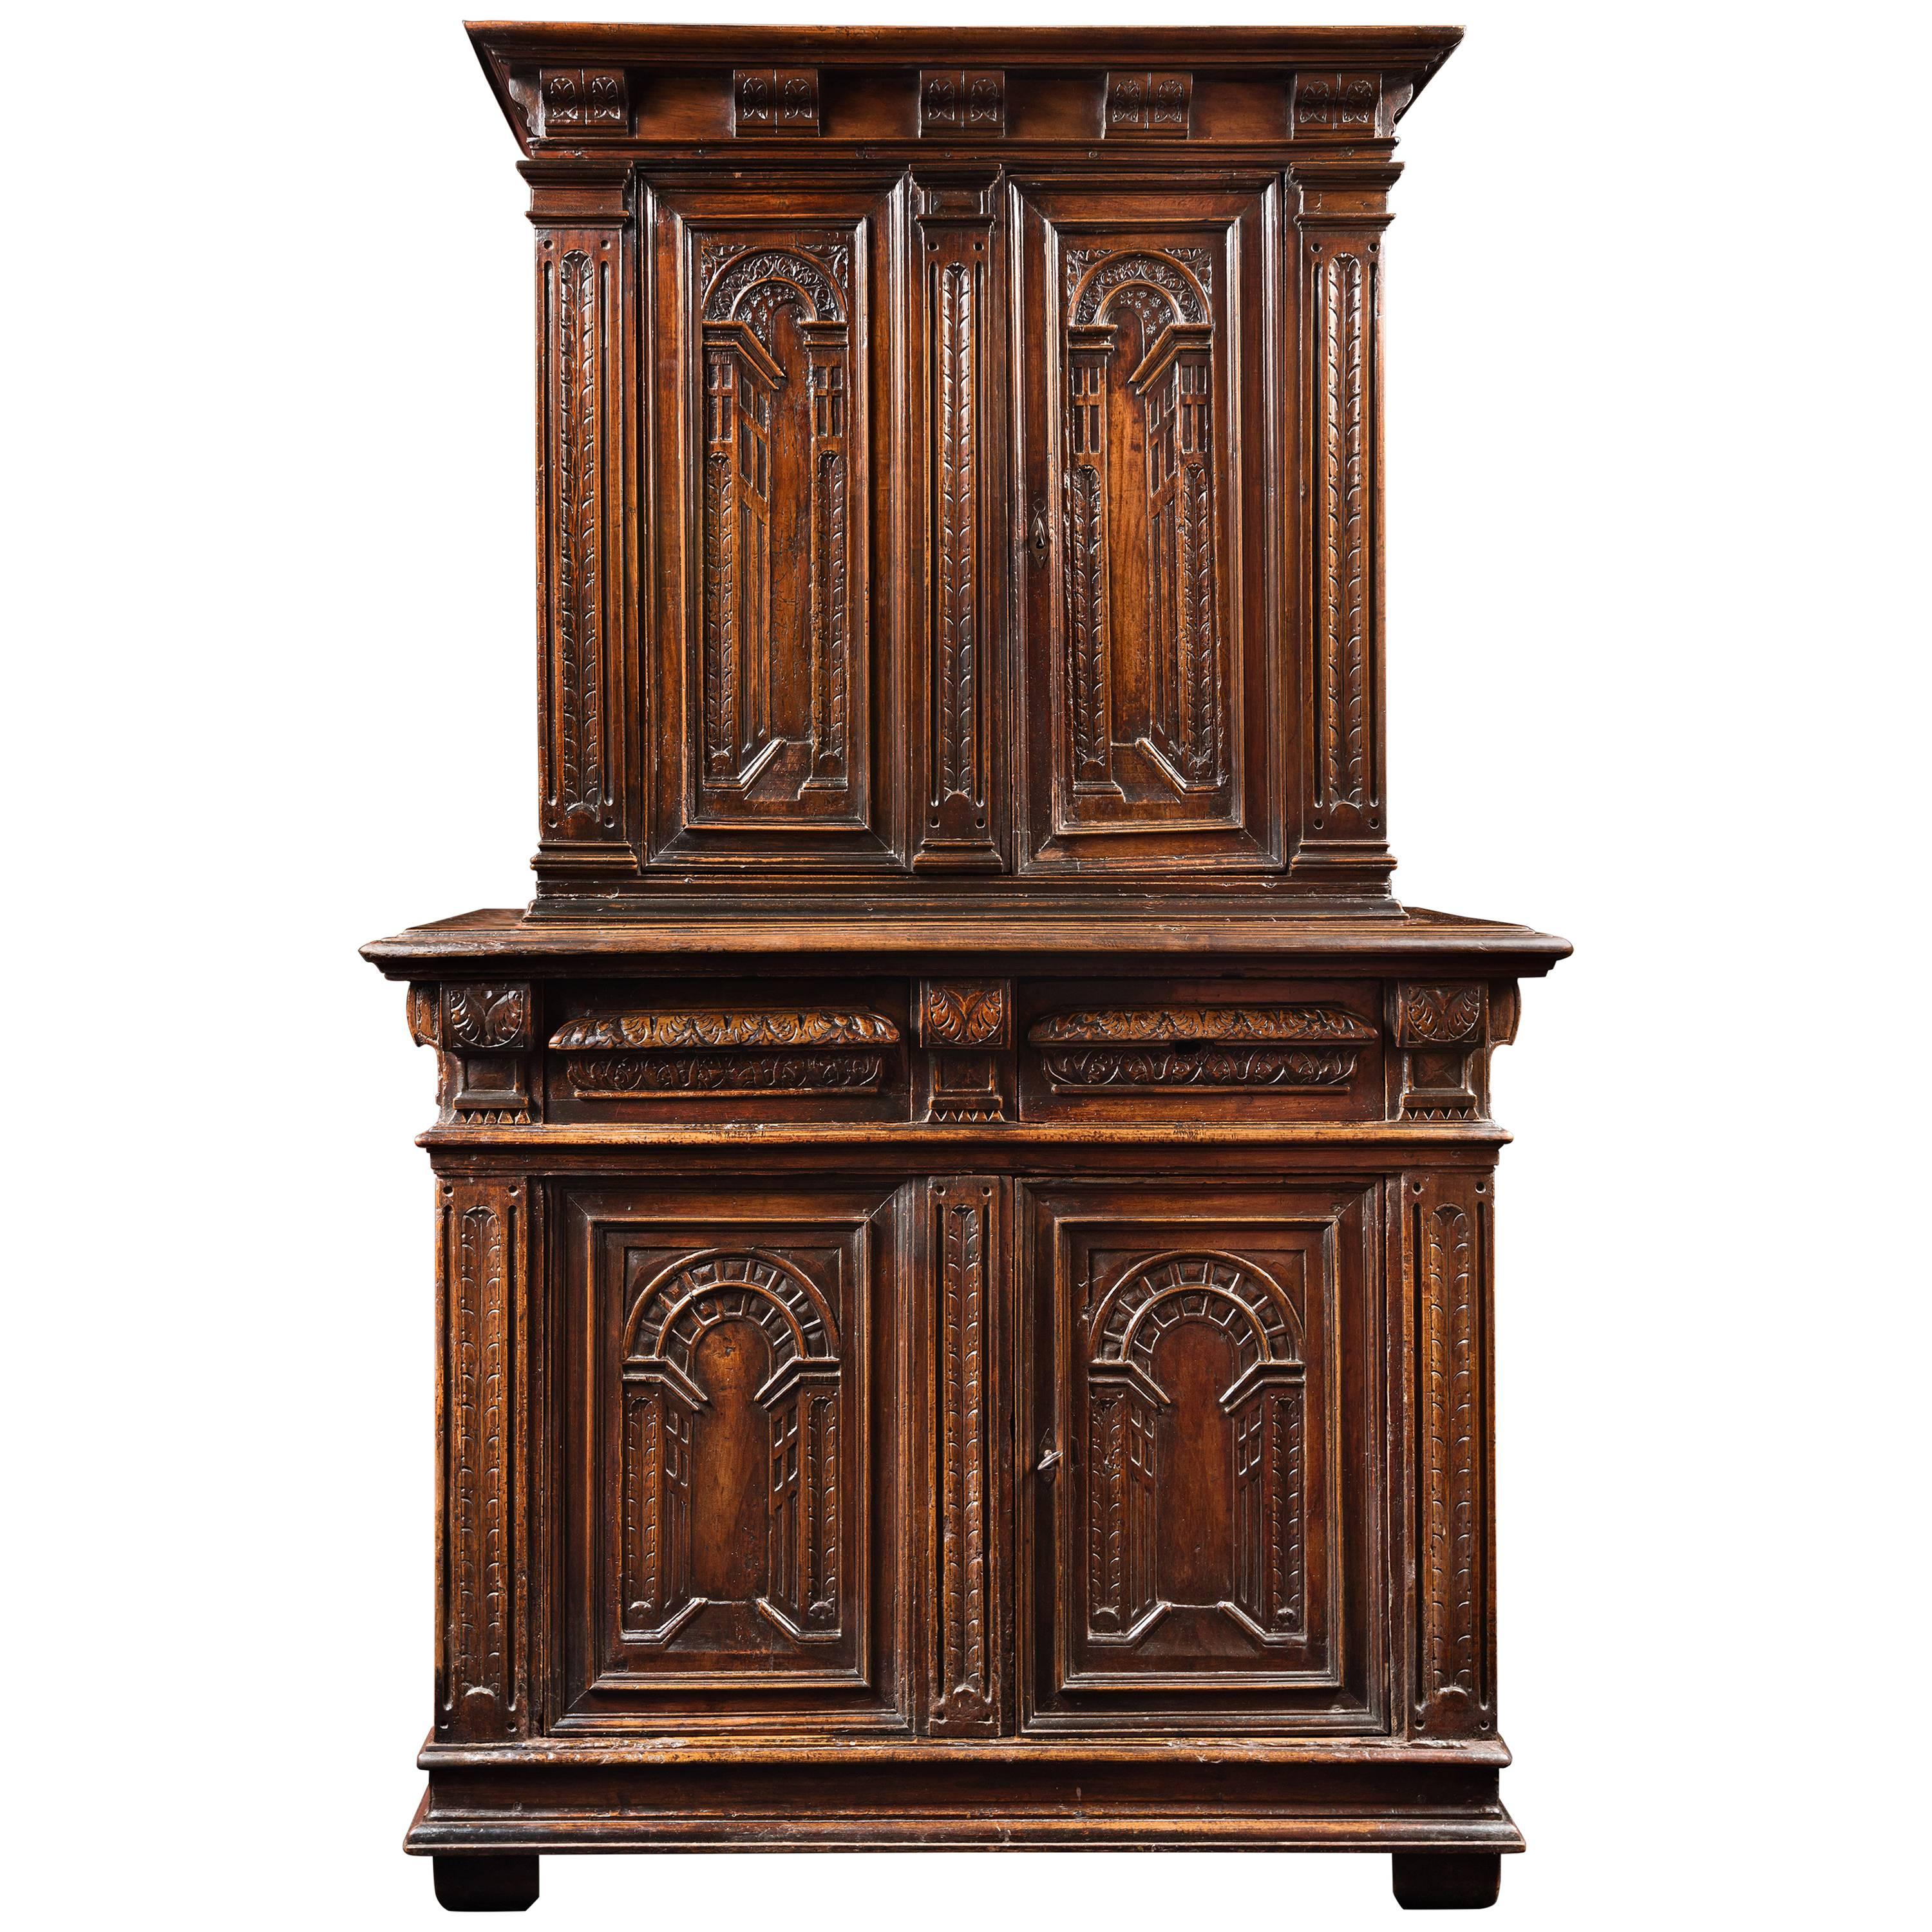 Cabinet of Renaissance Period with Decor of Perspectives in 'Trompe l'oeil' For Sale